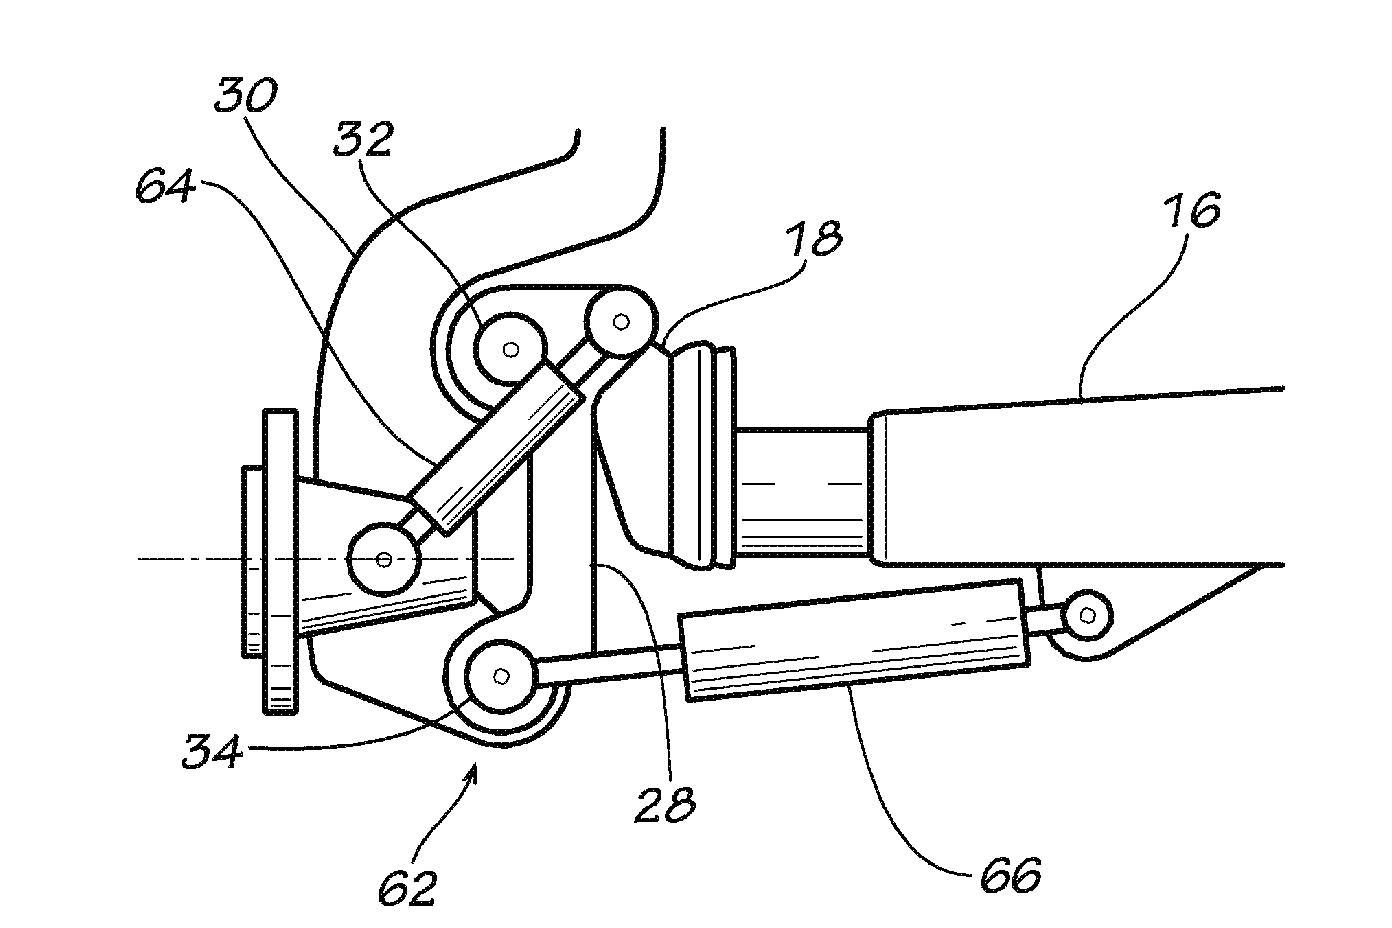 Axle Assembly for a Vehicle with a Double Kingpin Hinge Arrangement